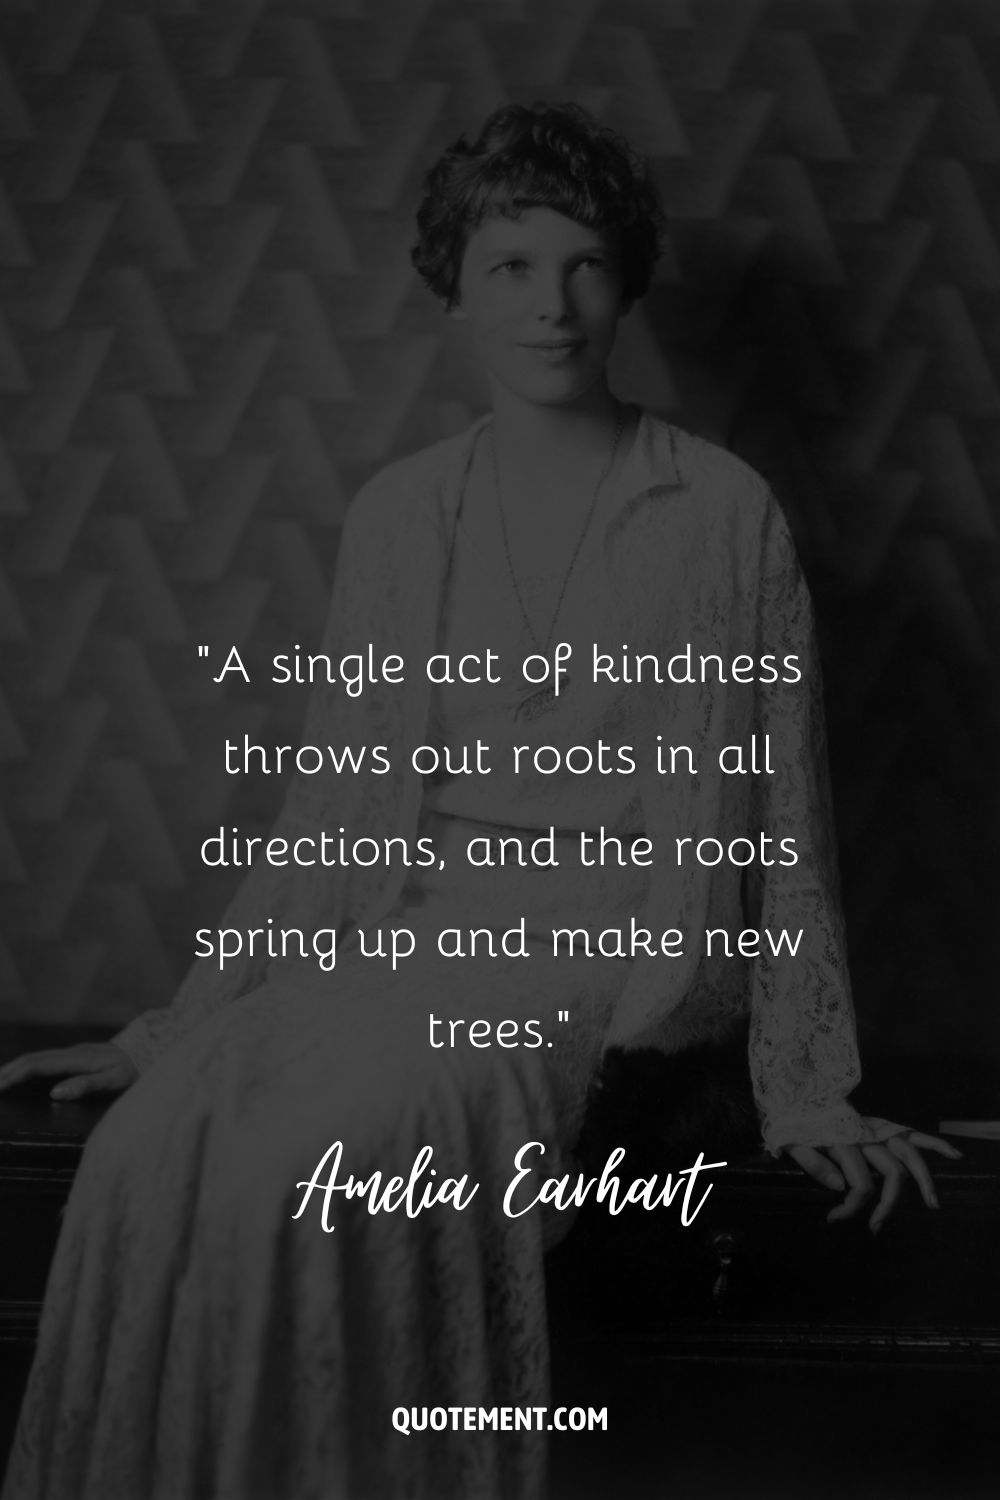 “A single act of kindness throws out roots in all directions, and the roots spring up and make new trees.” ― Amelia Earhart